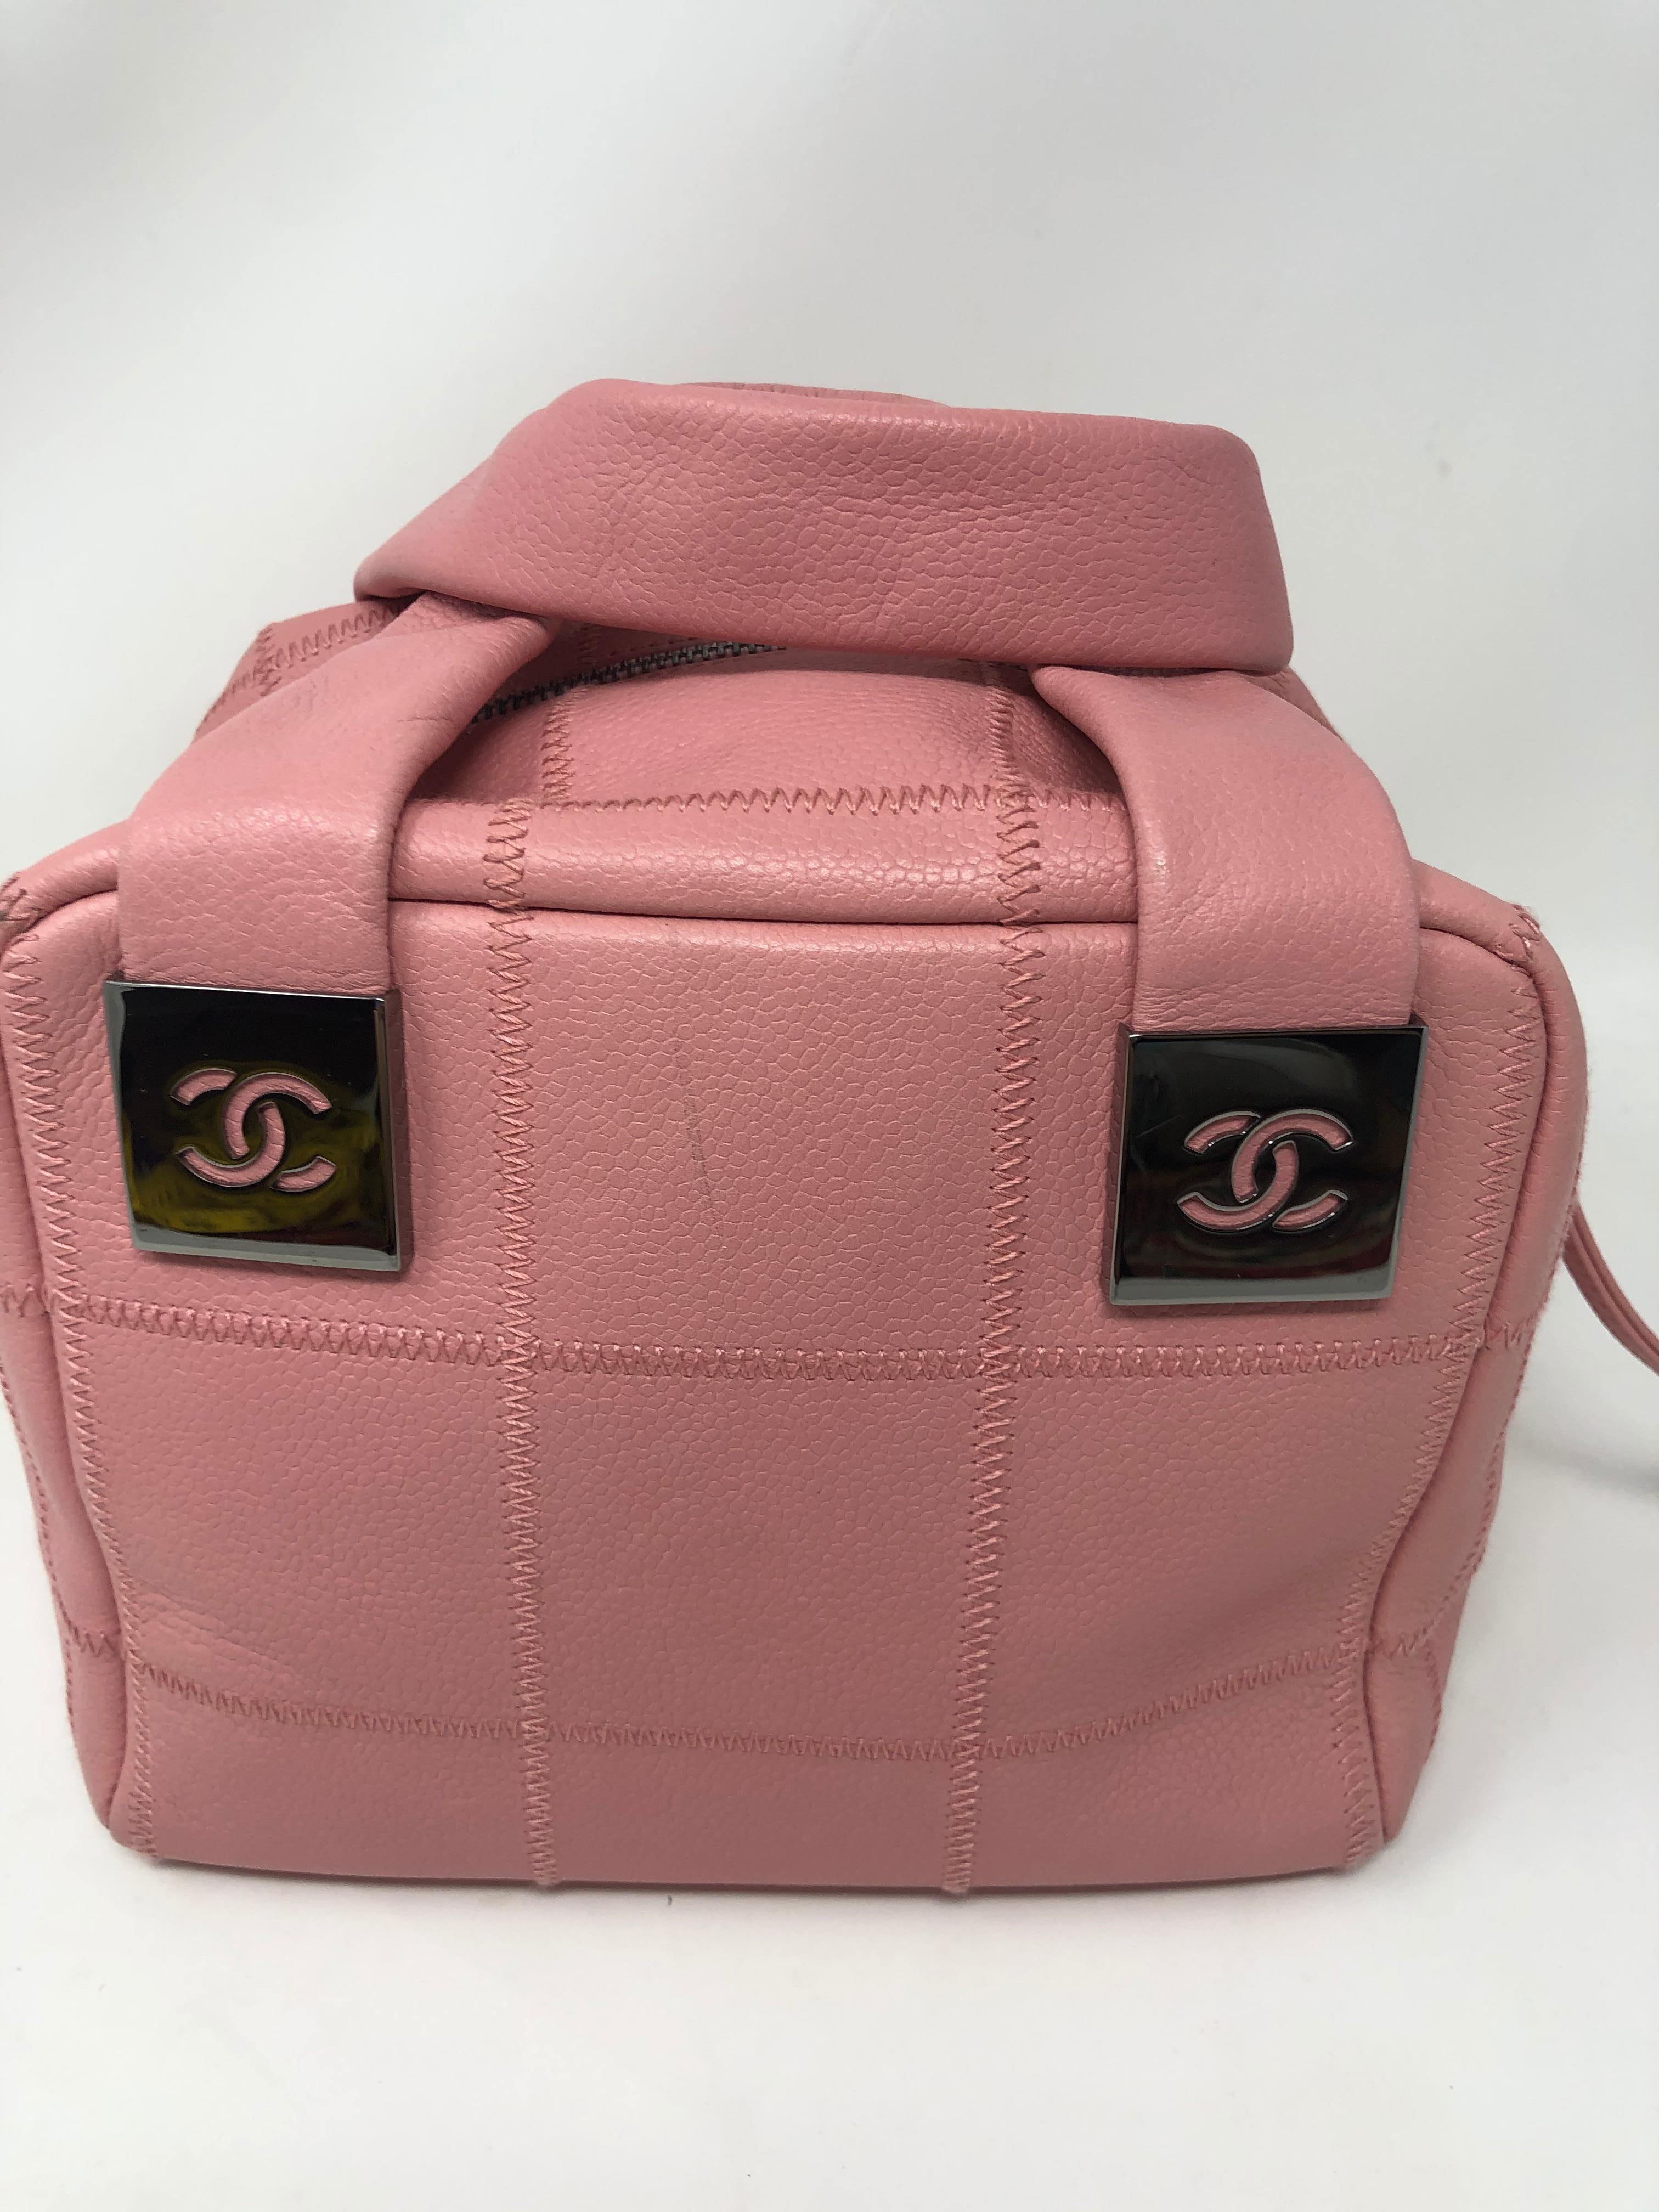 Chanel Pink Cube Bag with silver hardware. Vintage and cute style. Pink leather bag in good condition. Guaranteed authentic. 